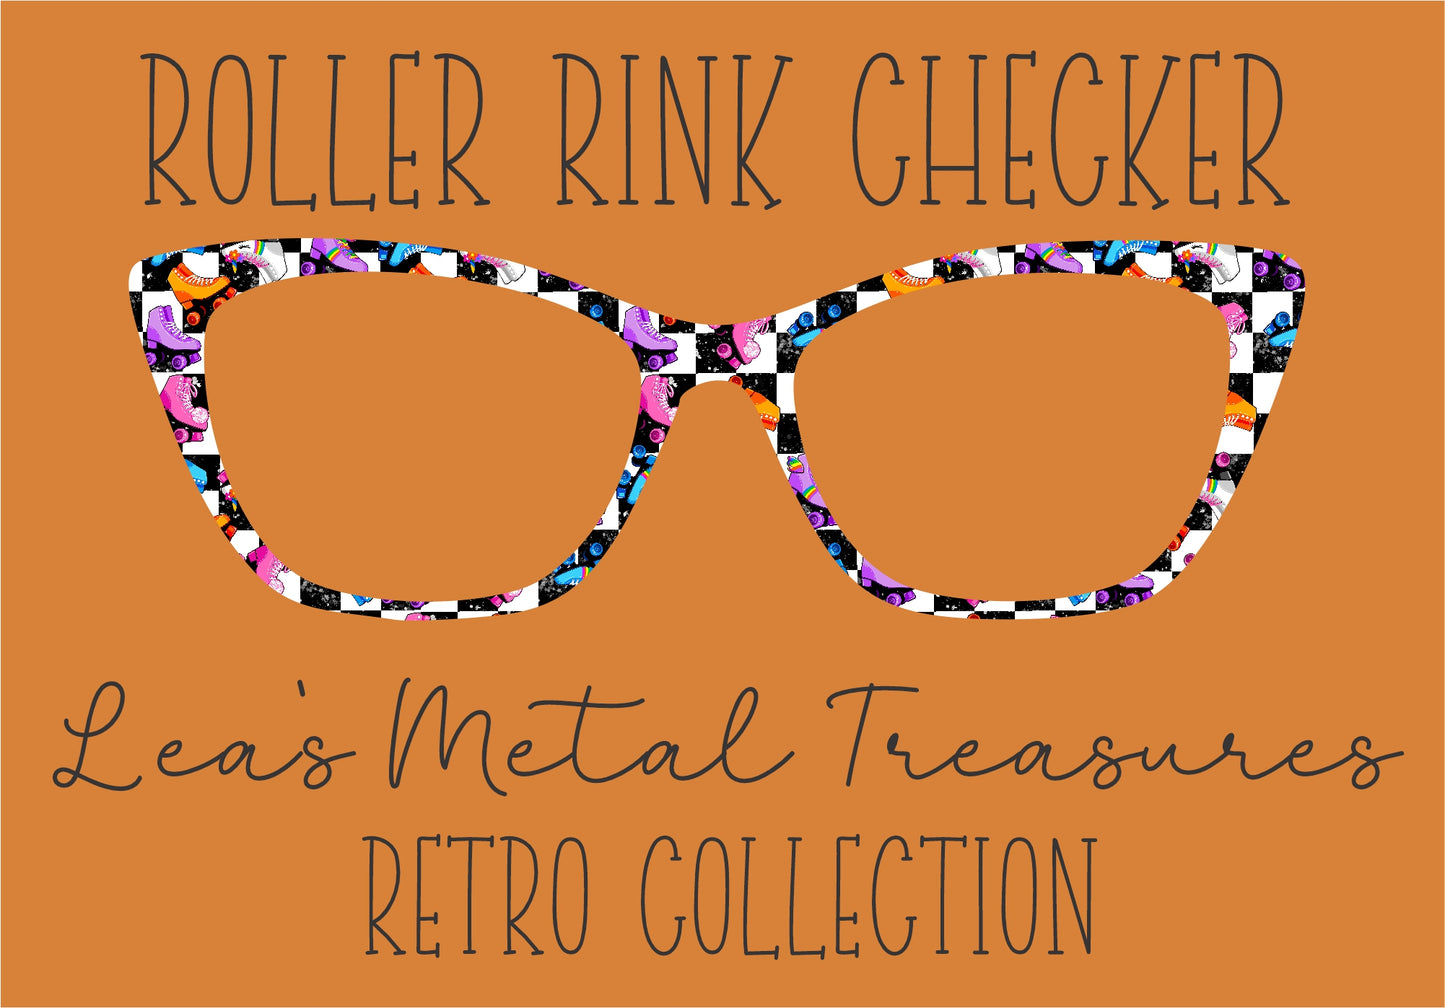 ROLLER RINK CHECKER Eyewear Frame Toppers COMES WITH MAGNETS